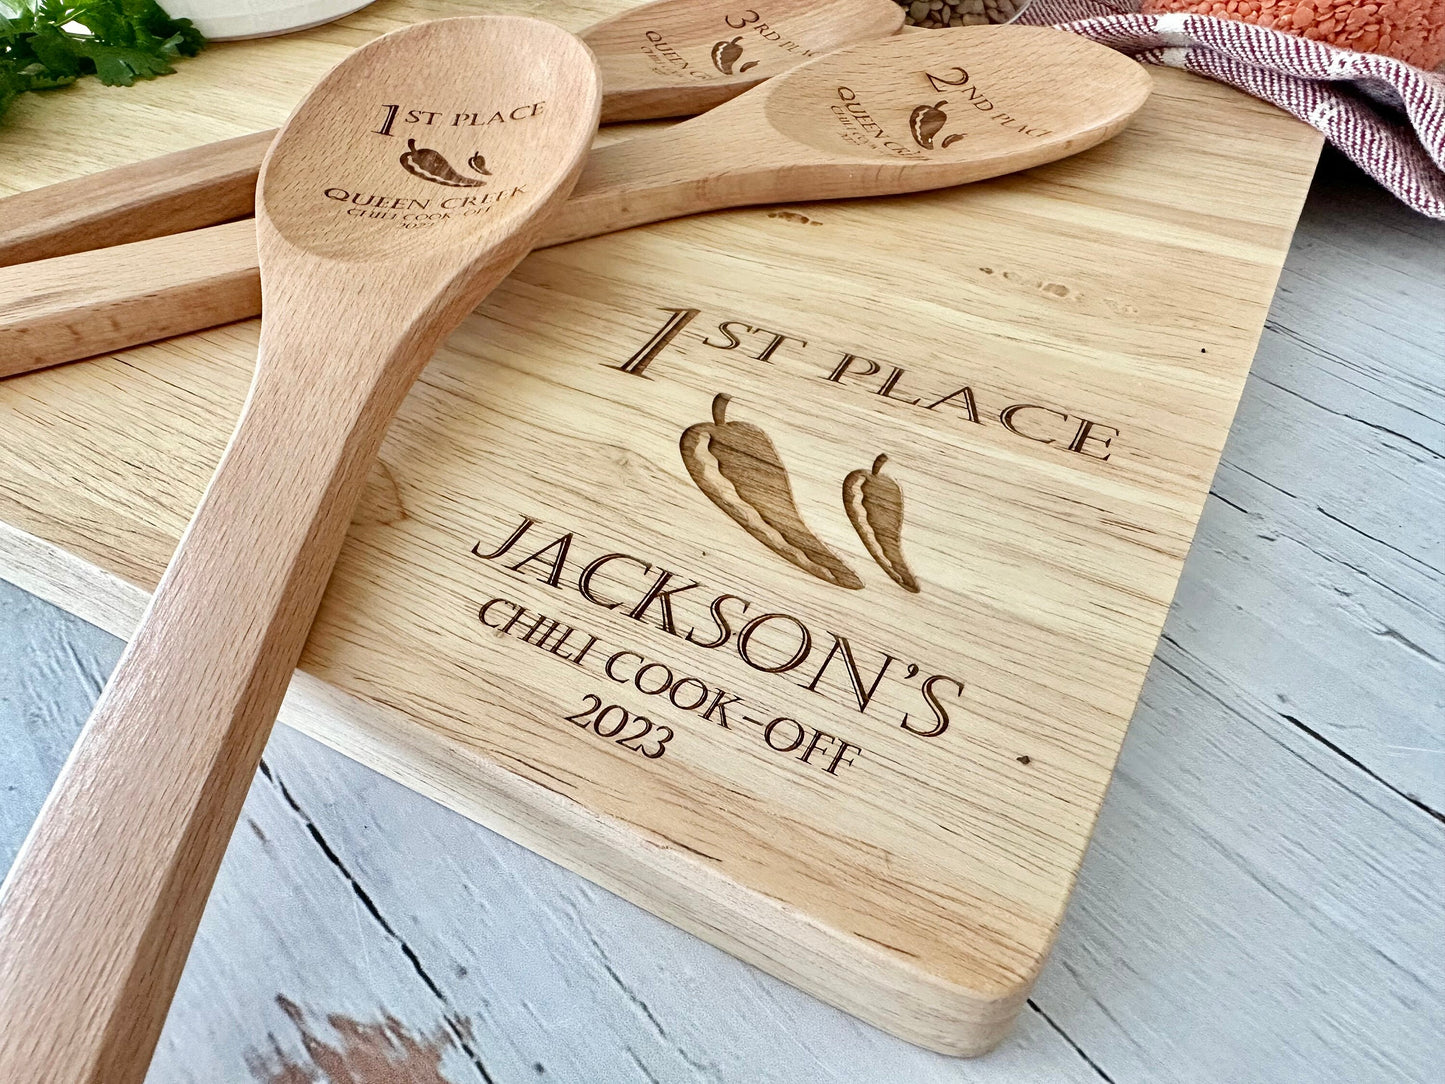 Personalized wooden spoon and Board